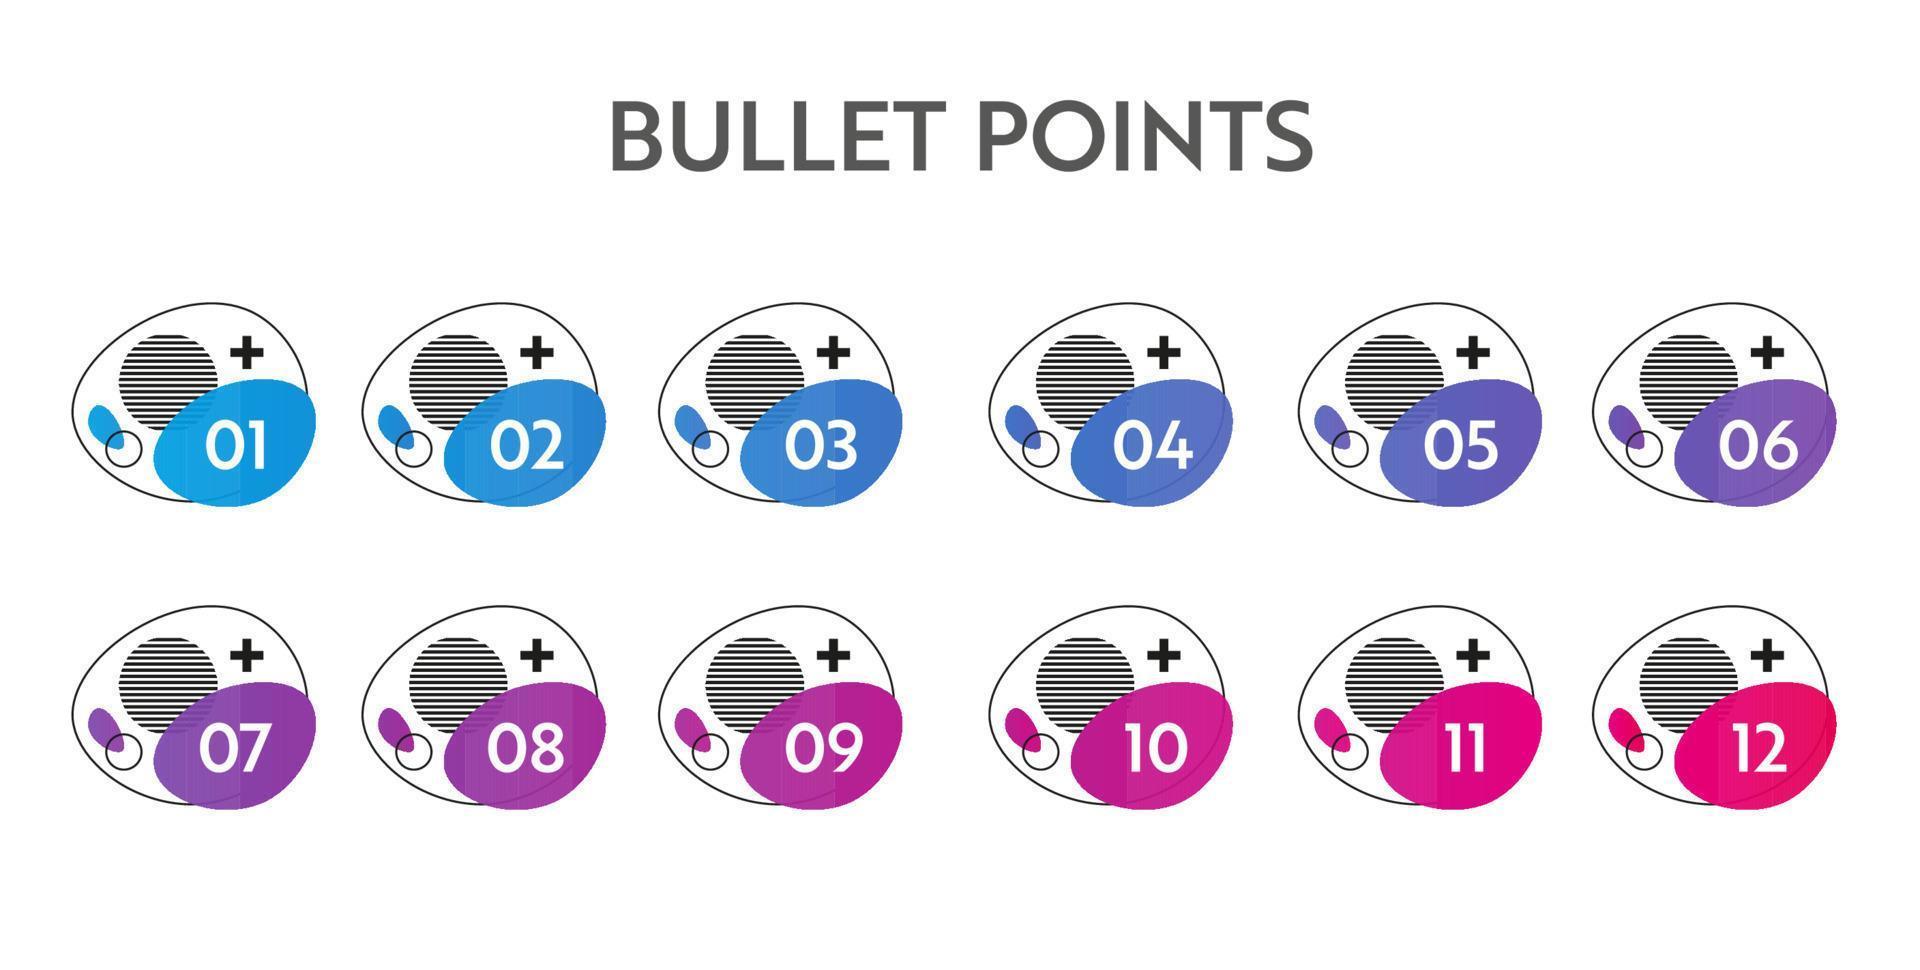 Bullet points numbers. Colorful list markers from 1 to 12. Vector design elements set for modern infographic